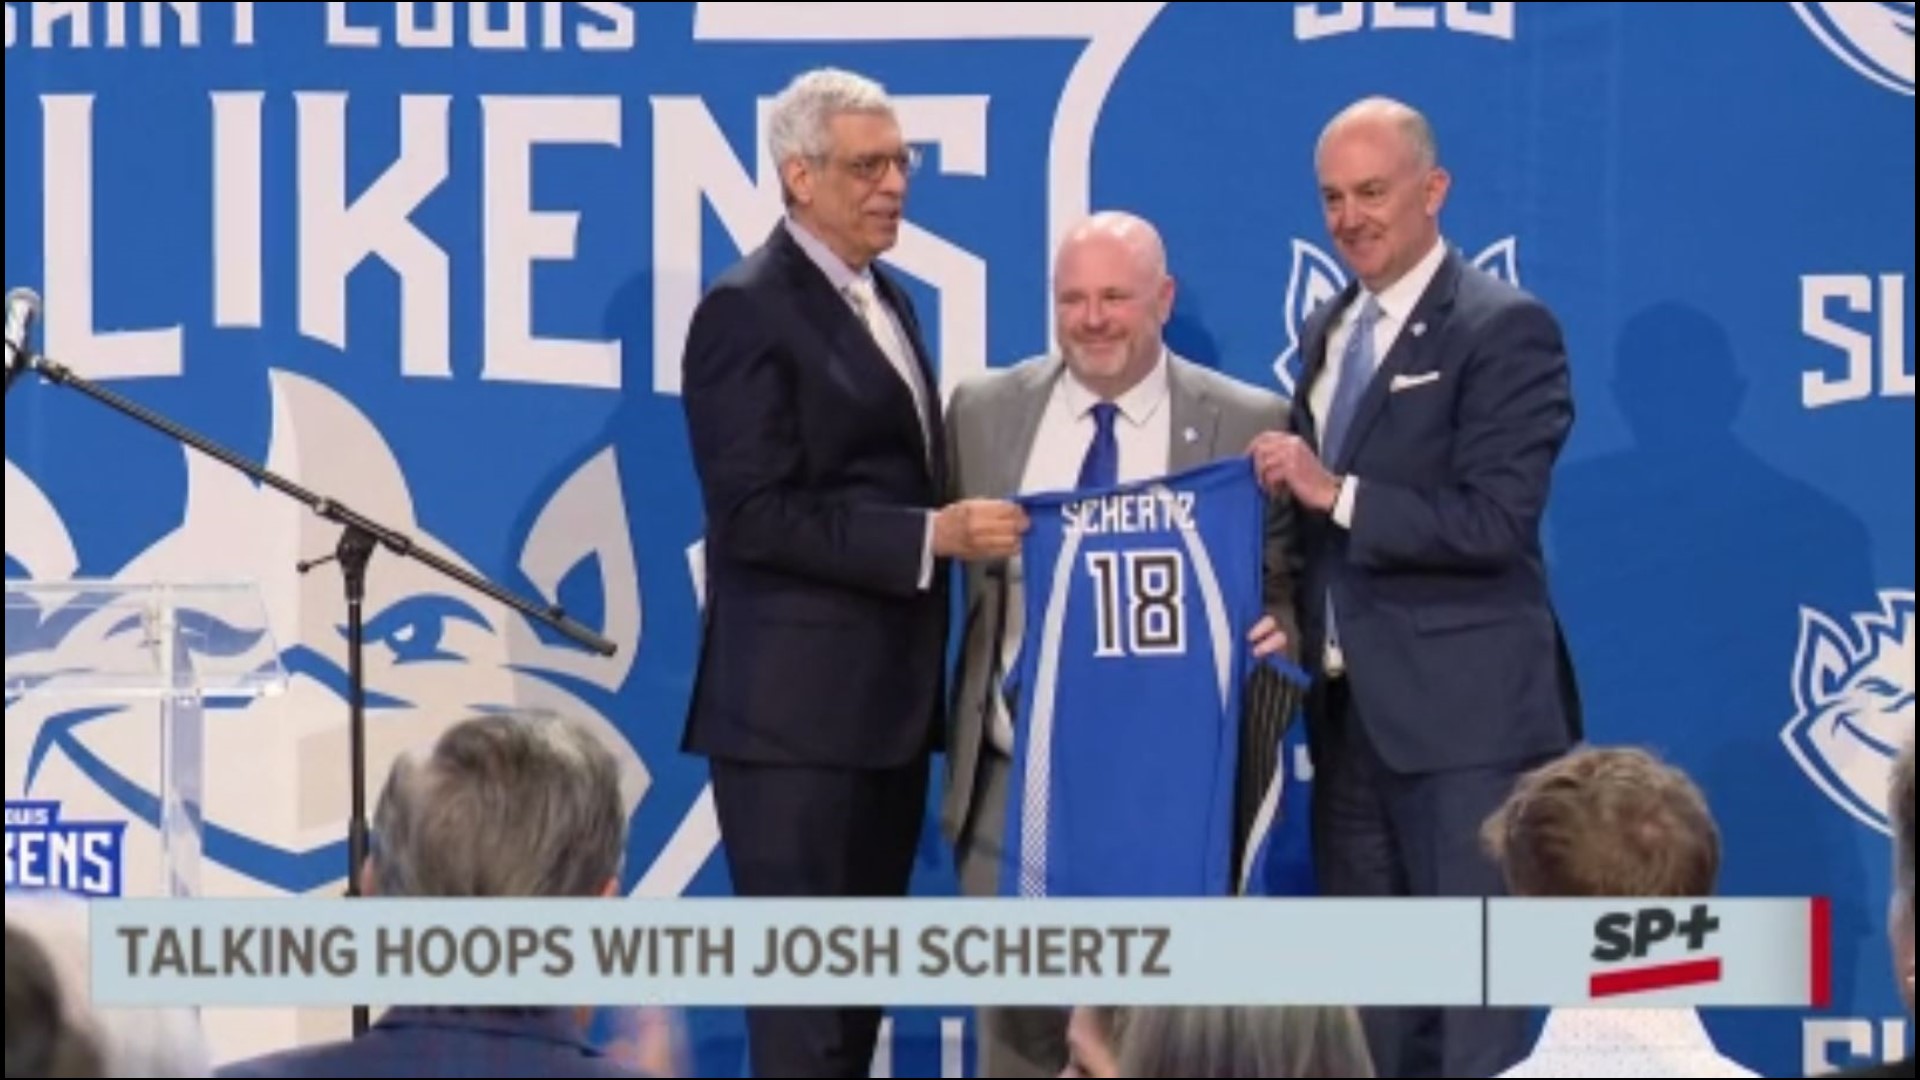 5 On Your Side's Frank Cusumano sat down with new Saint Louis University basketball head coach Josh Schertz. They talk about St. Louis, players and more.